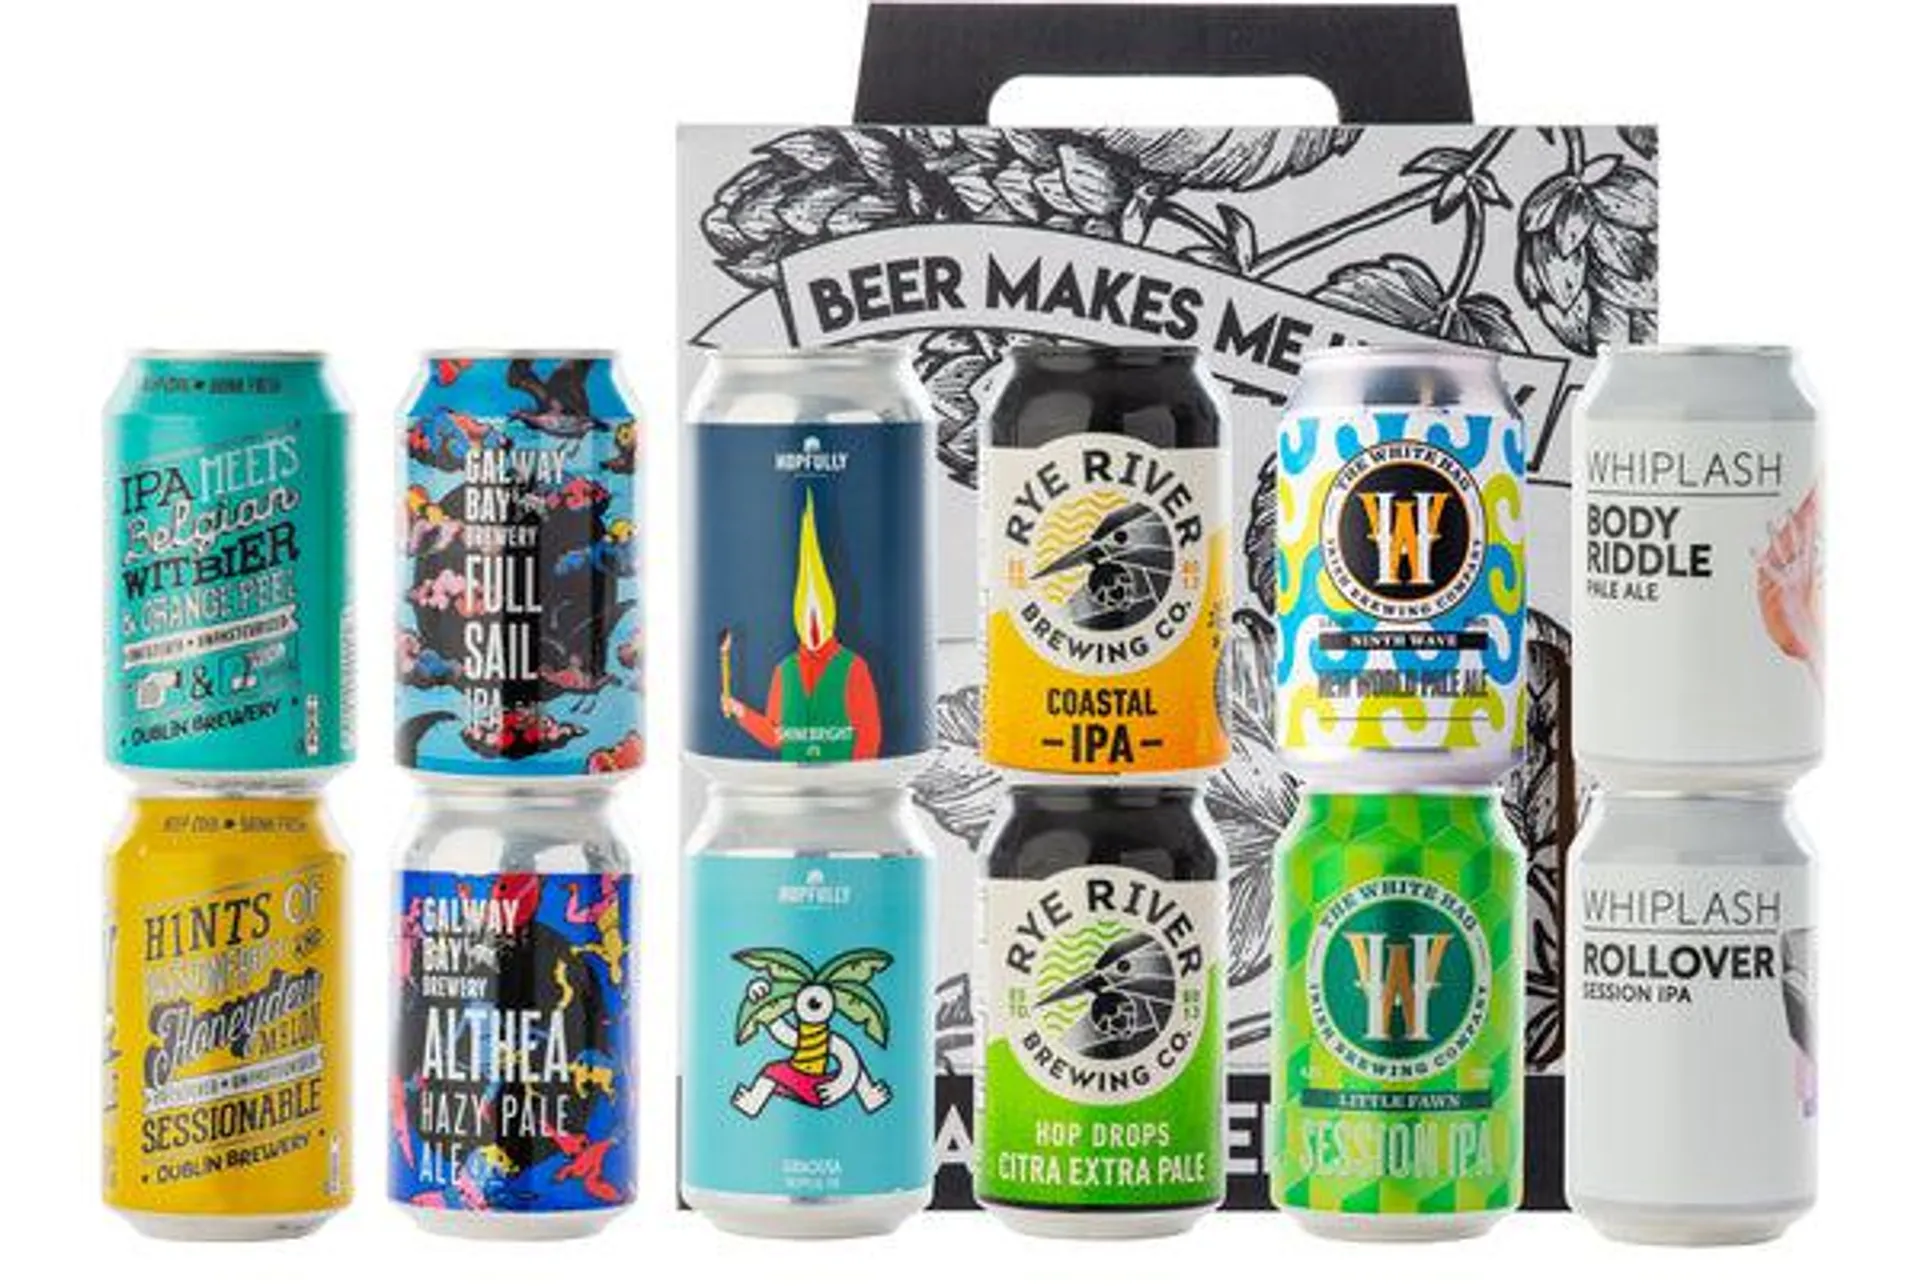 "Can You Believe It" 12 x 330ml Craft Beer Can Gift Pack